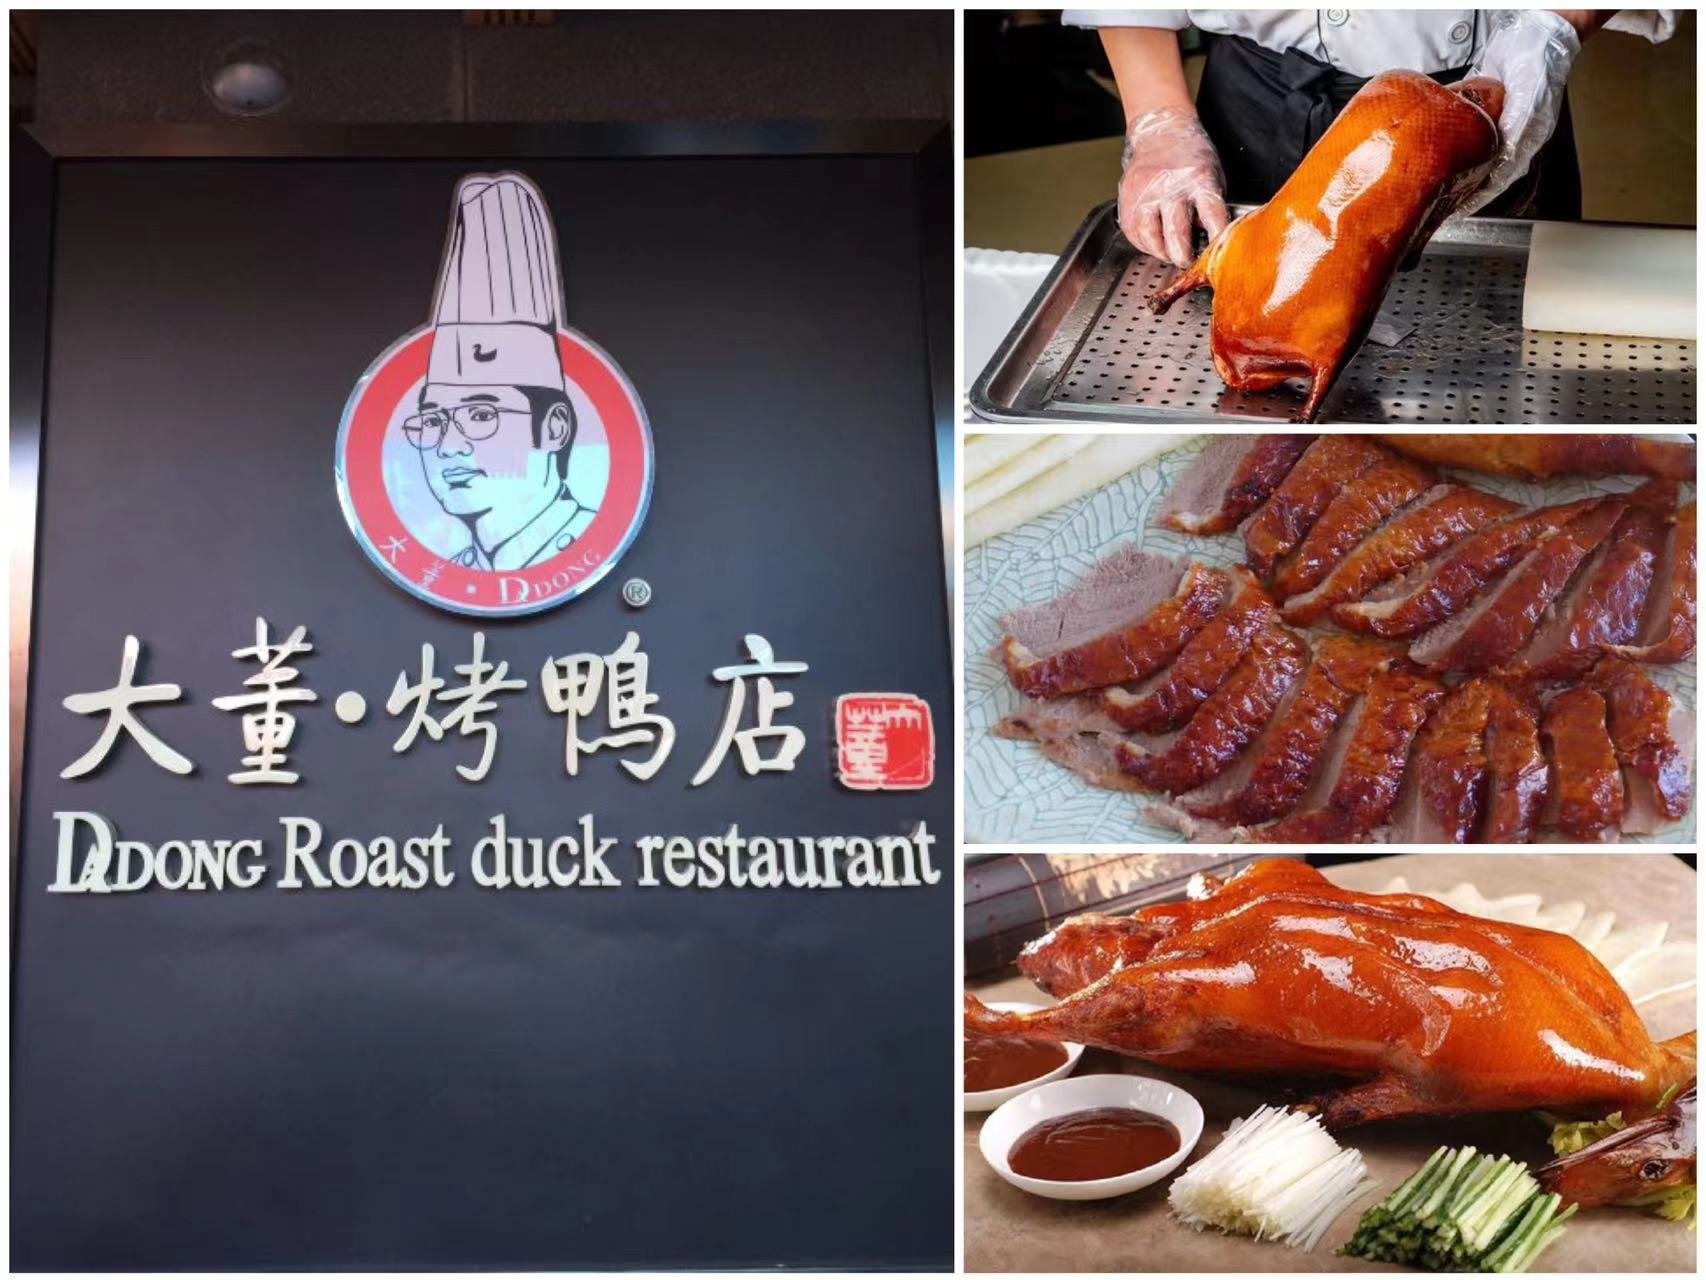 The thing Bertrand Cristau would miss the most if he left China: Peking duck.